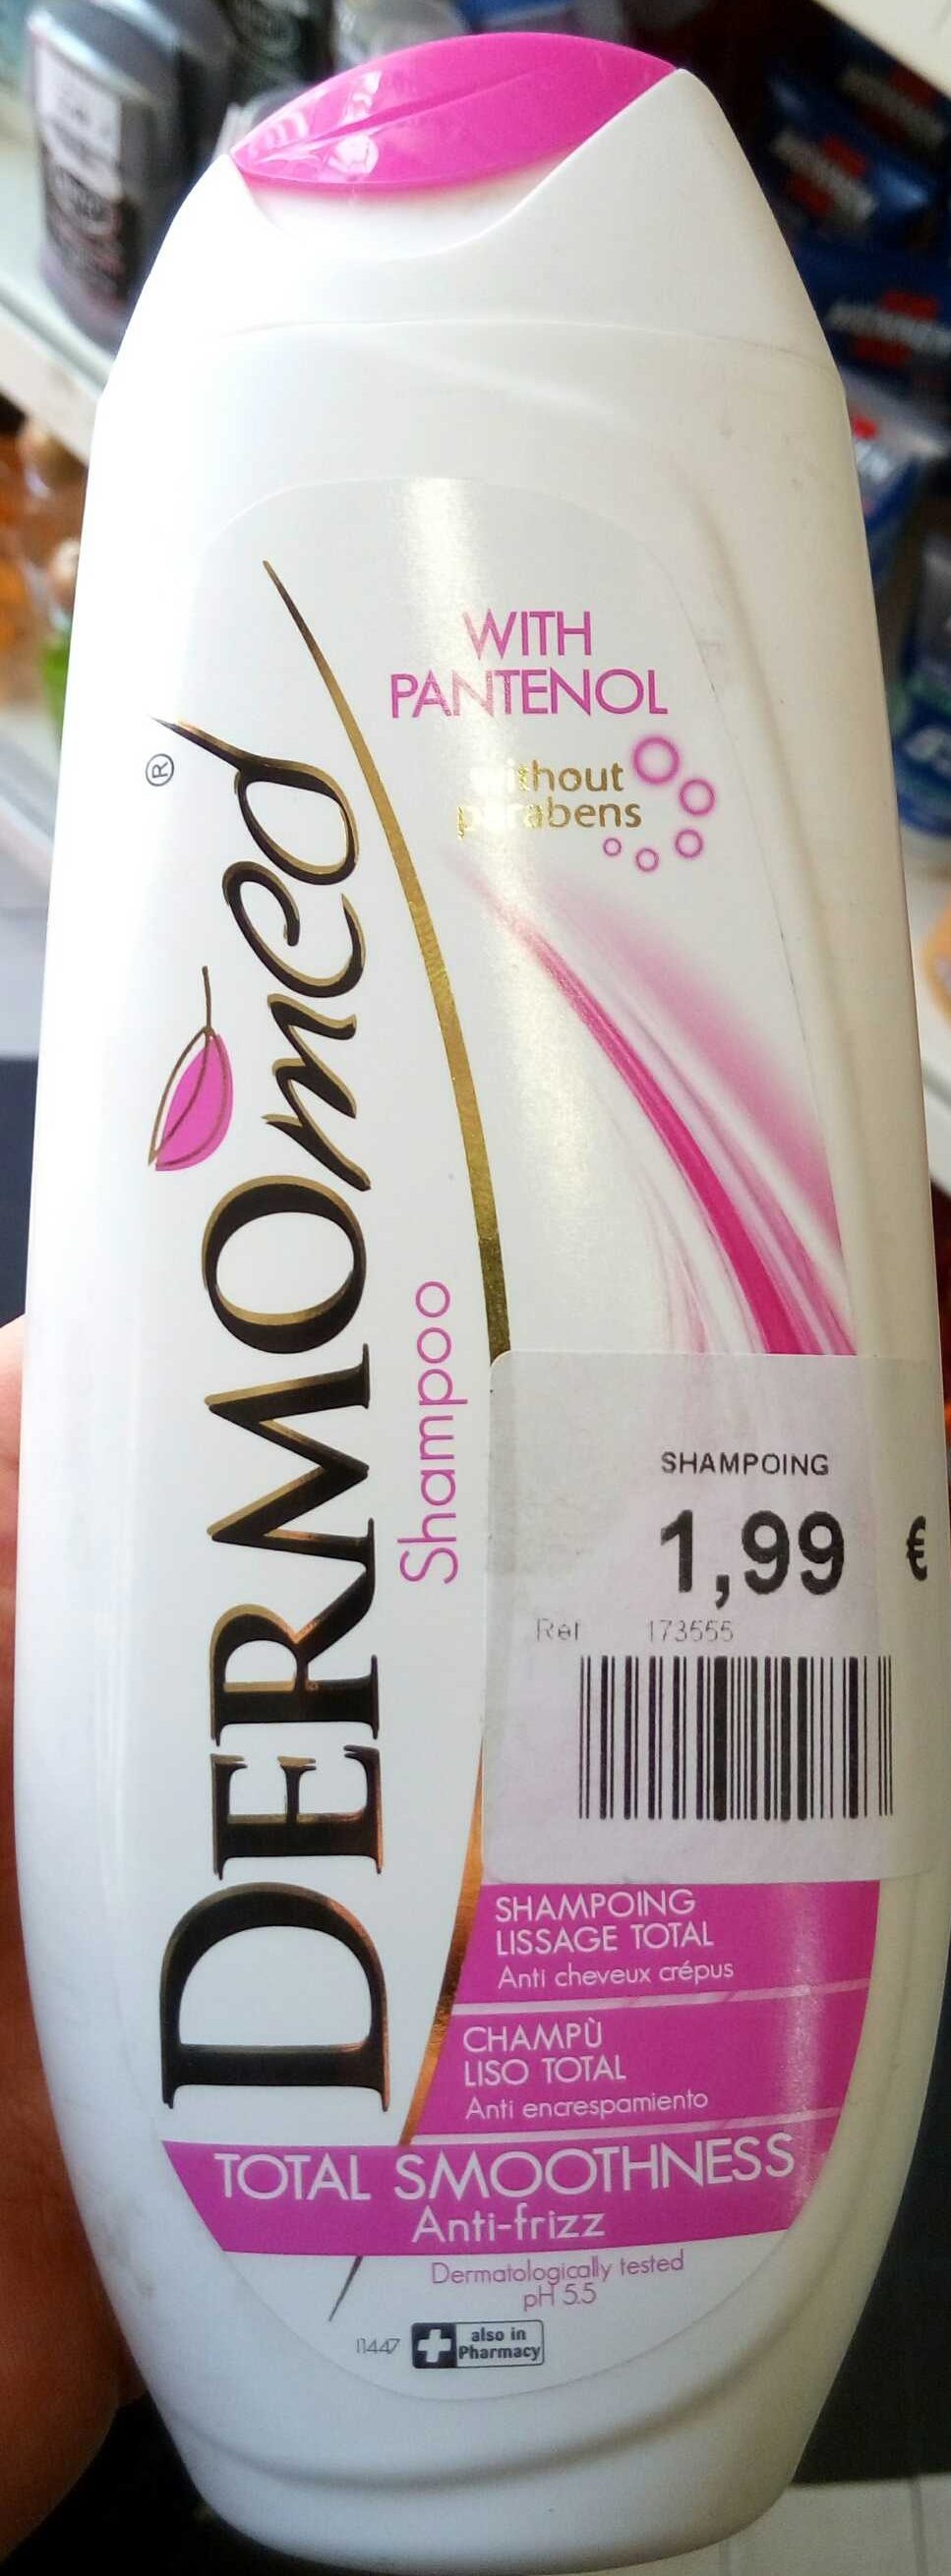 Shampoing Lissage Total - Product - fr